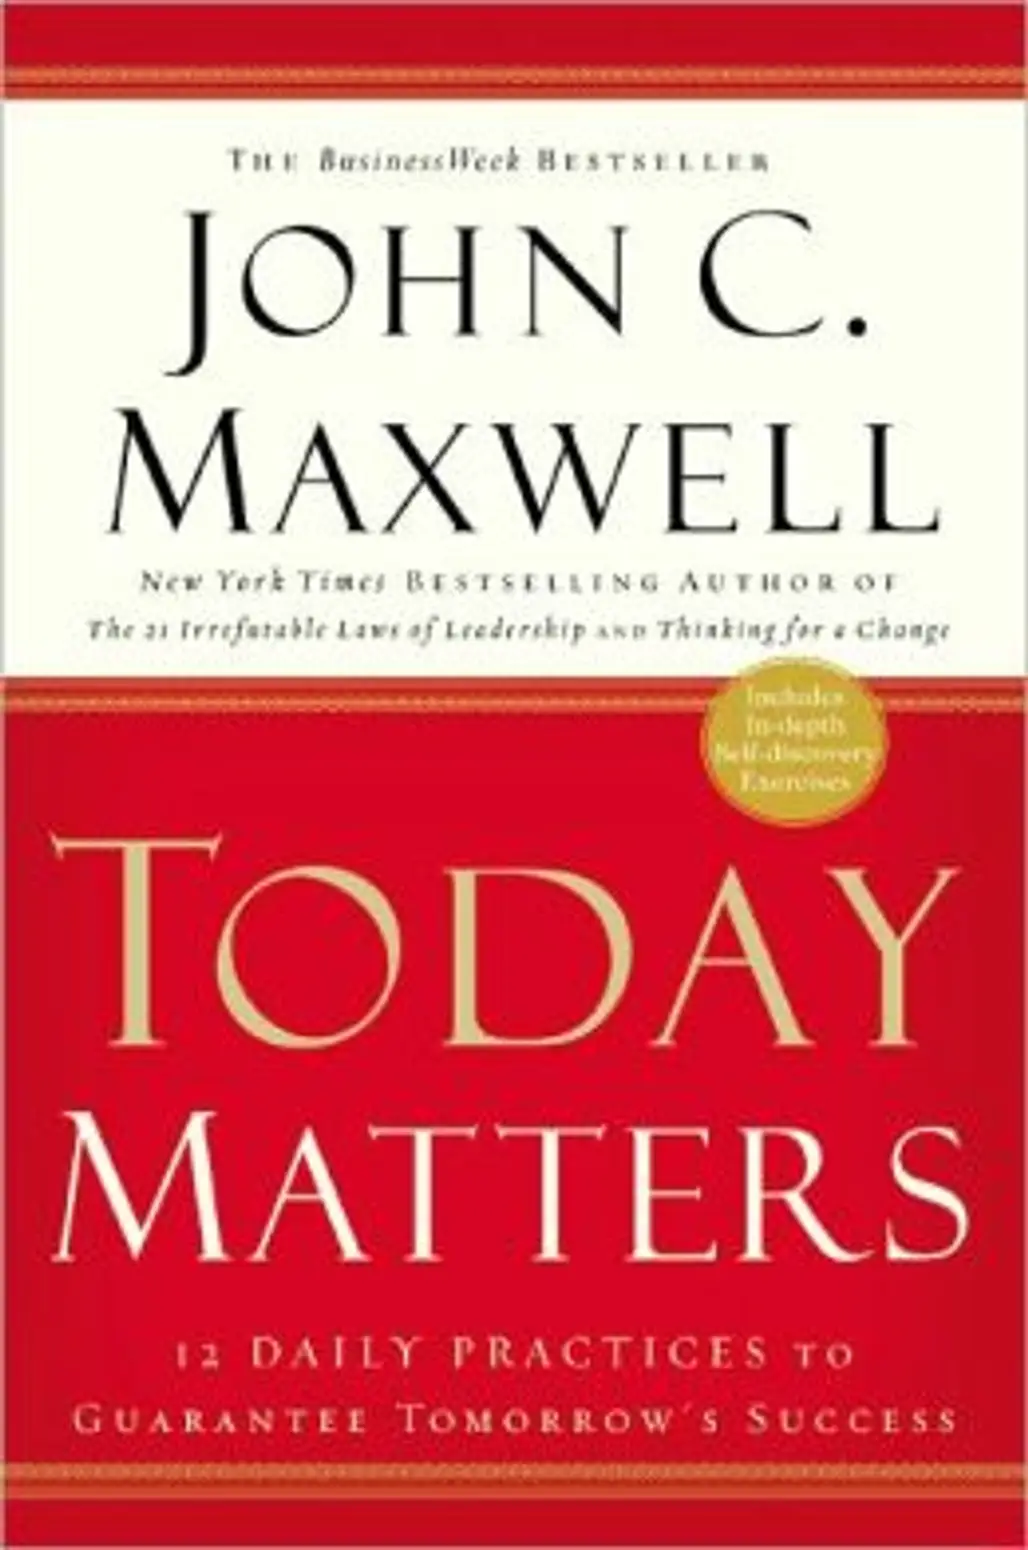 Today Matters: 12 Daily Practices to Guarantee Tomorrow's Success by John C. Maxwell